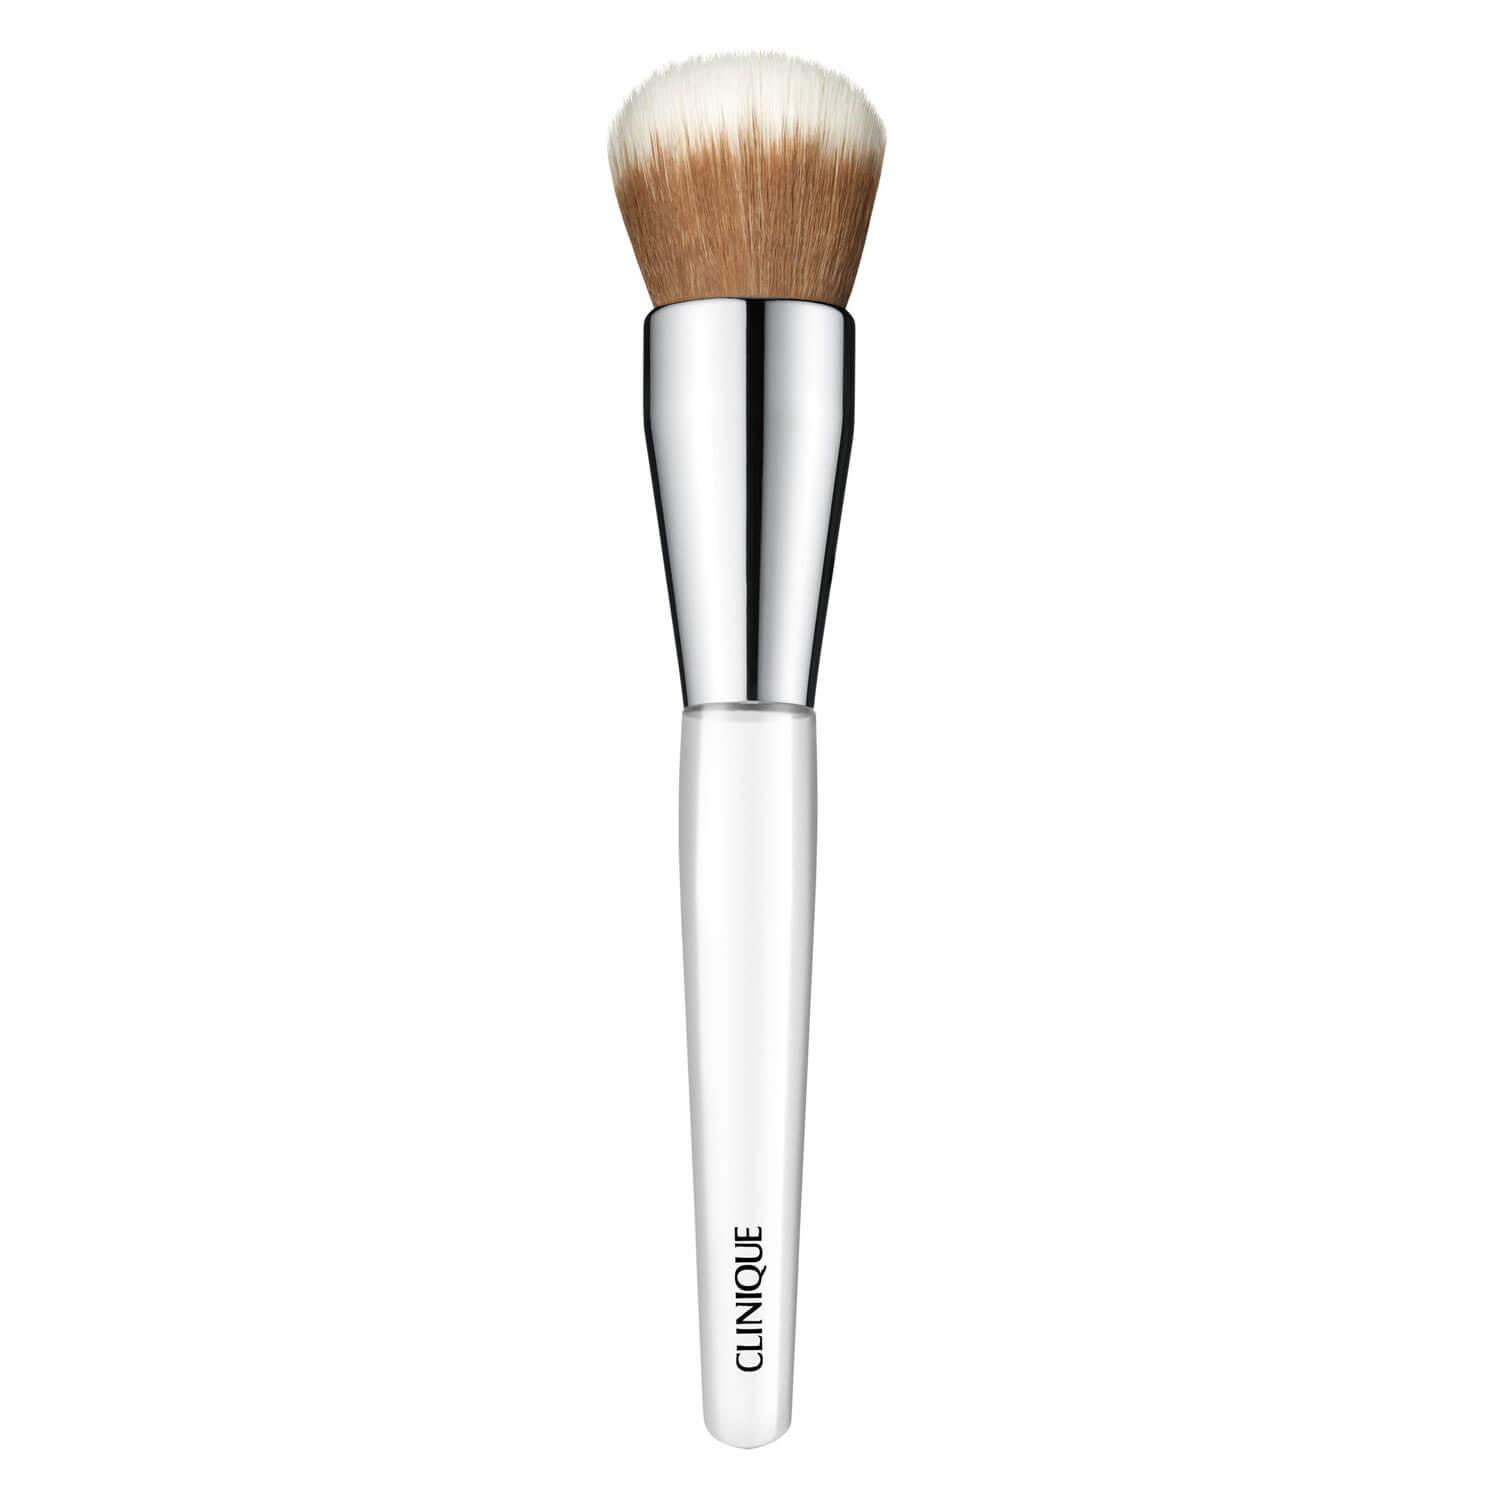 Clinique Brush Collection - Foundation Buff Brush